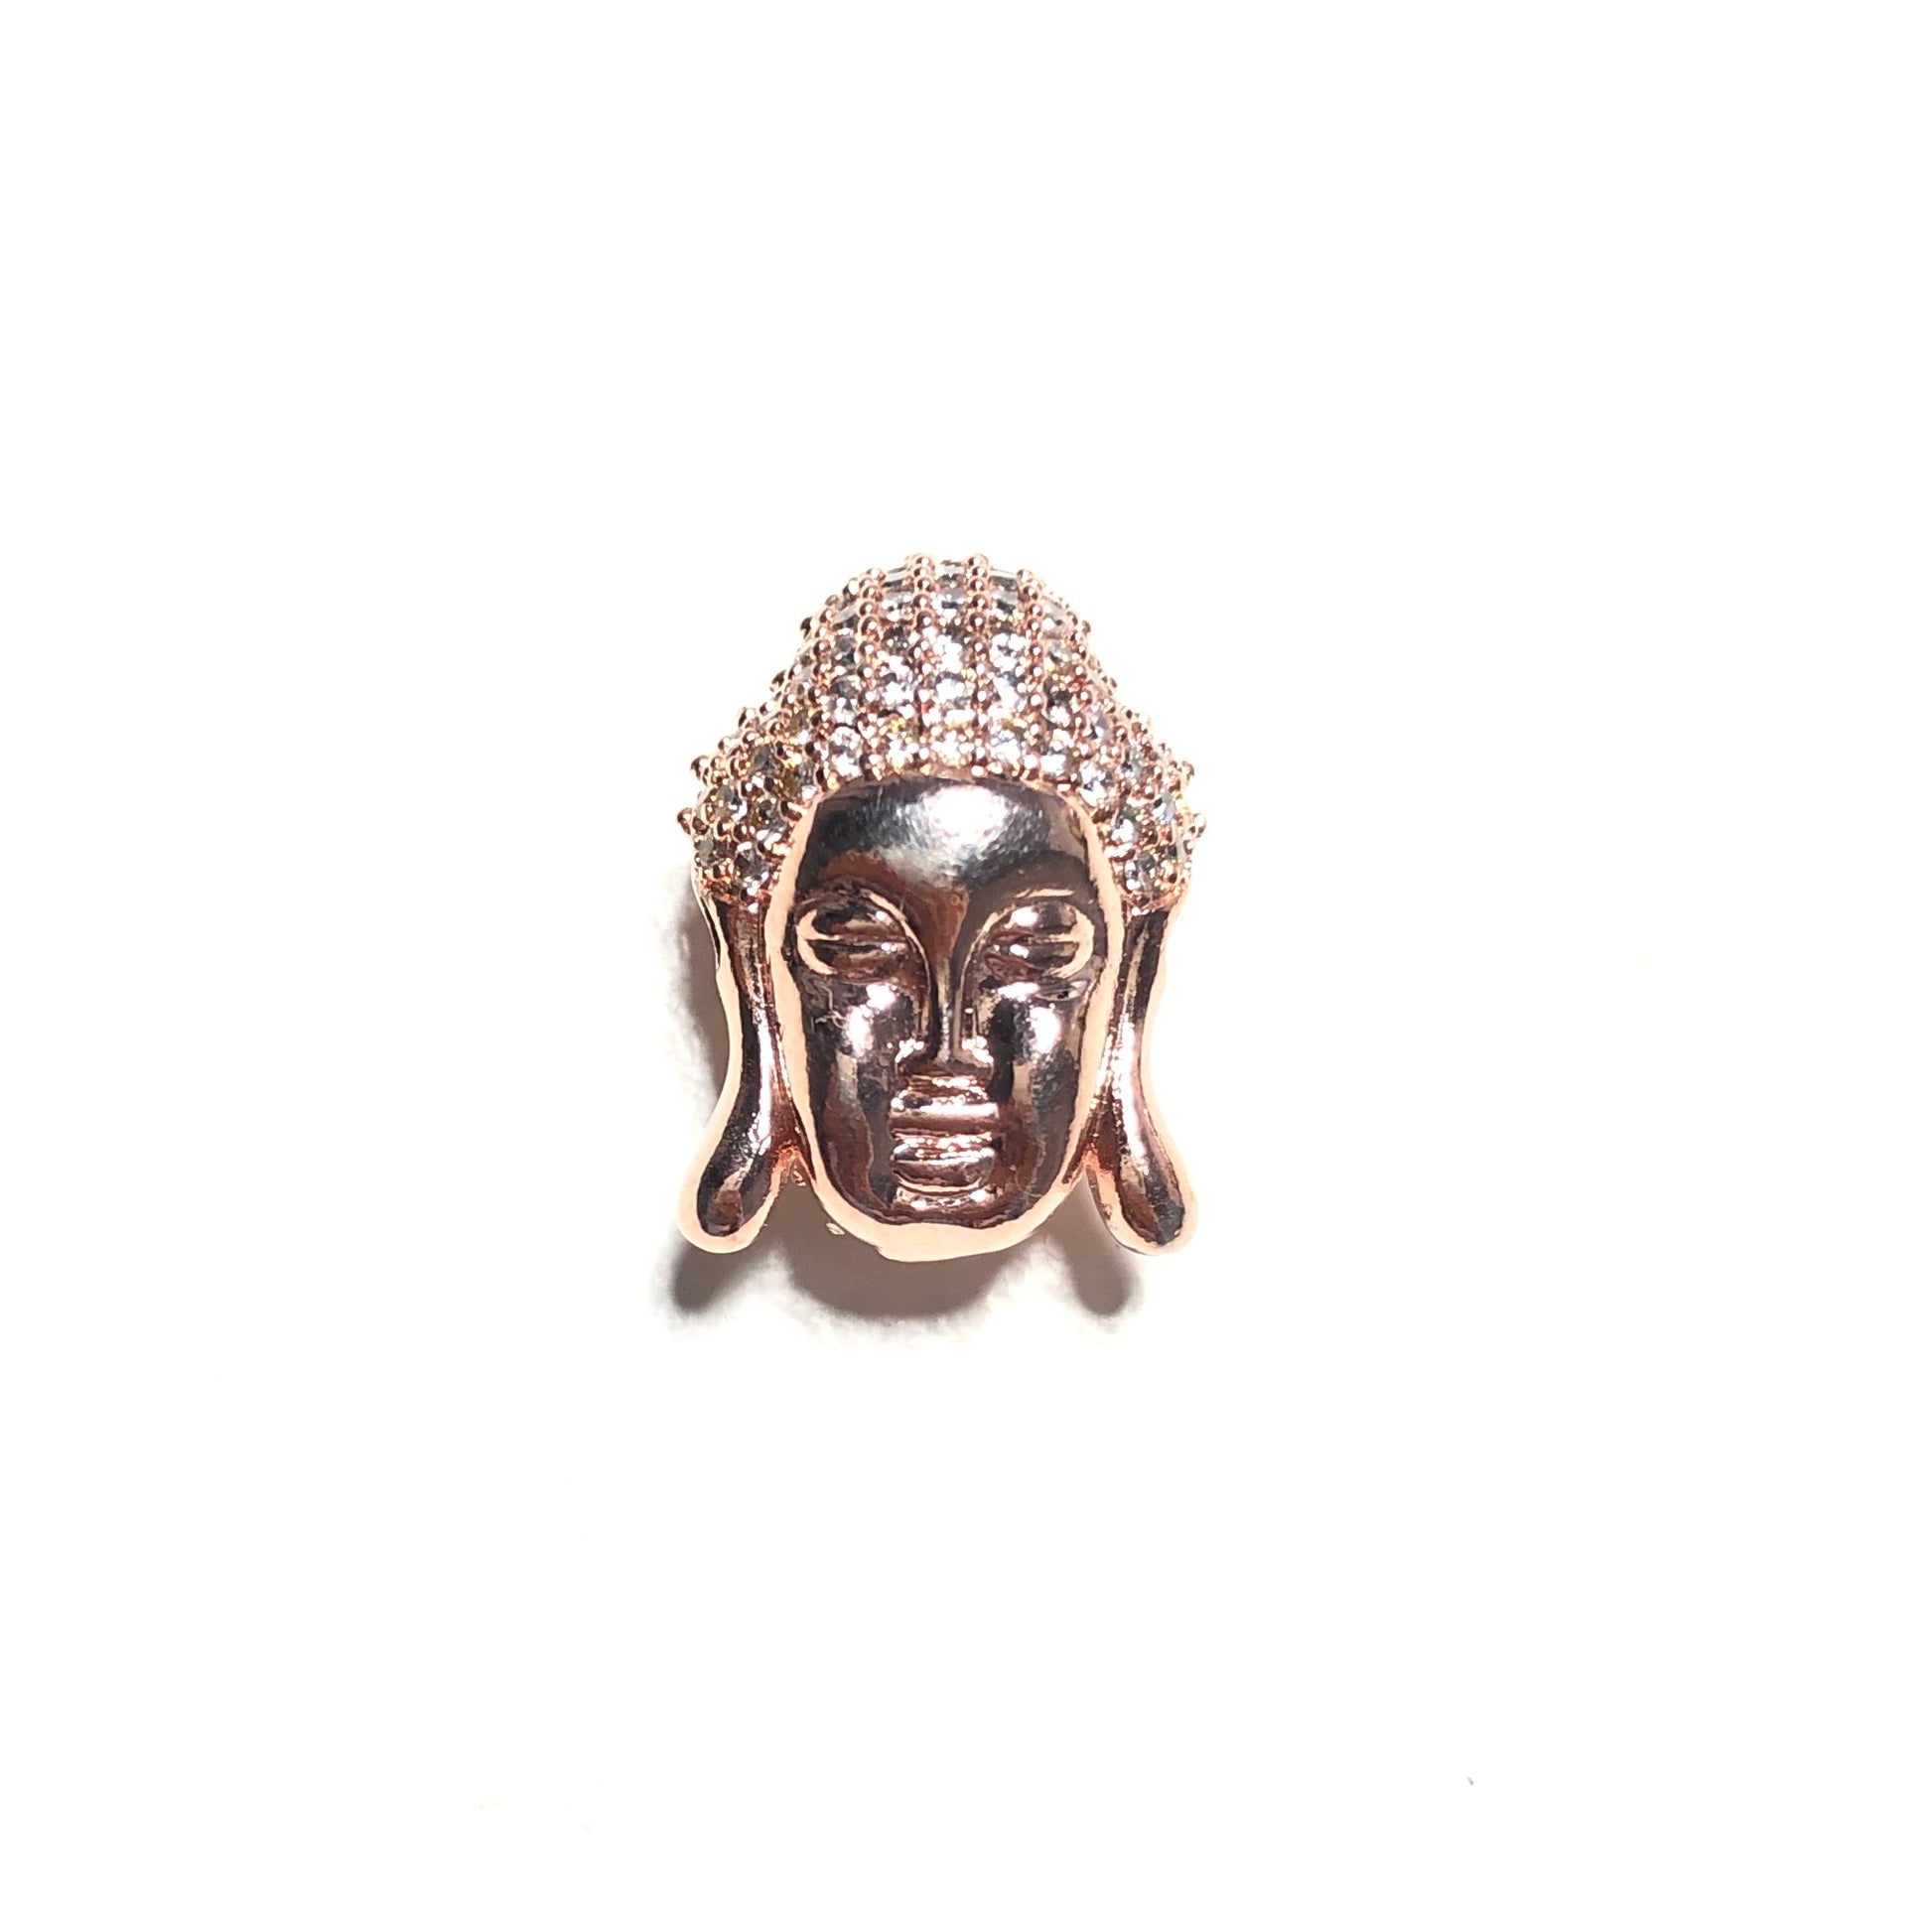 10pcs/lot 18*14mm CZ Paved Buddha Spacers Rose Gold CZ Paved Spacers Charms Beads Beyond